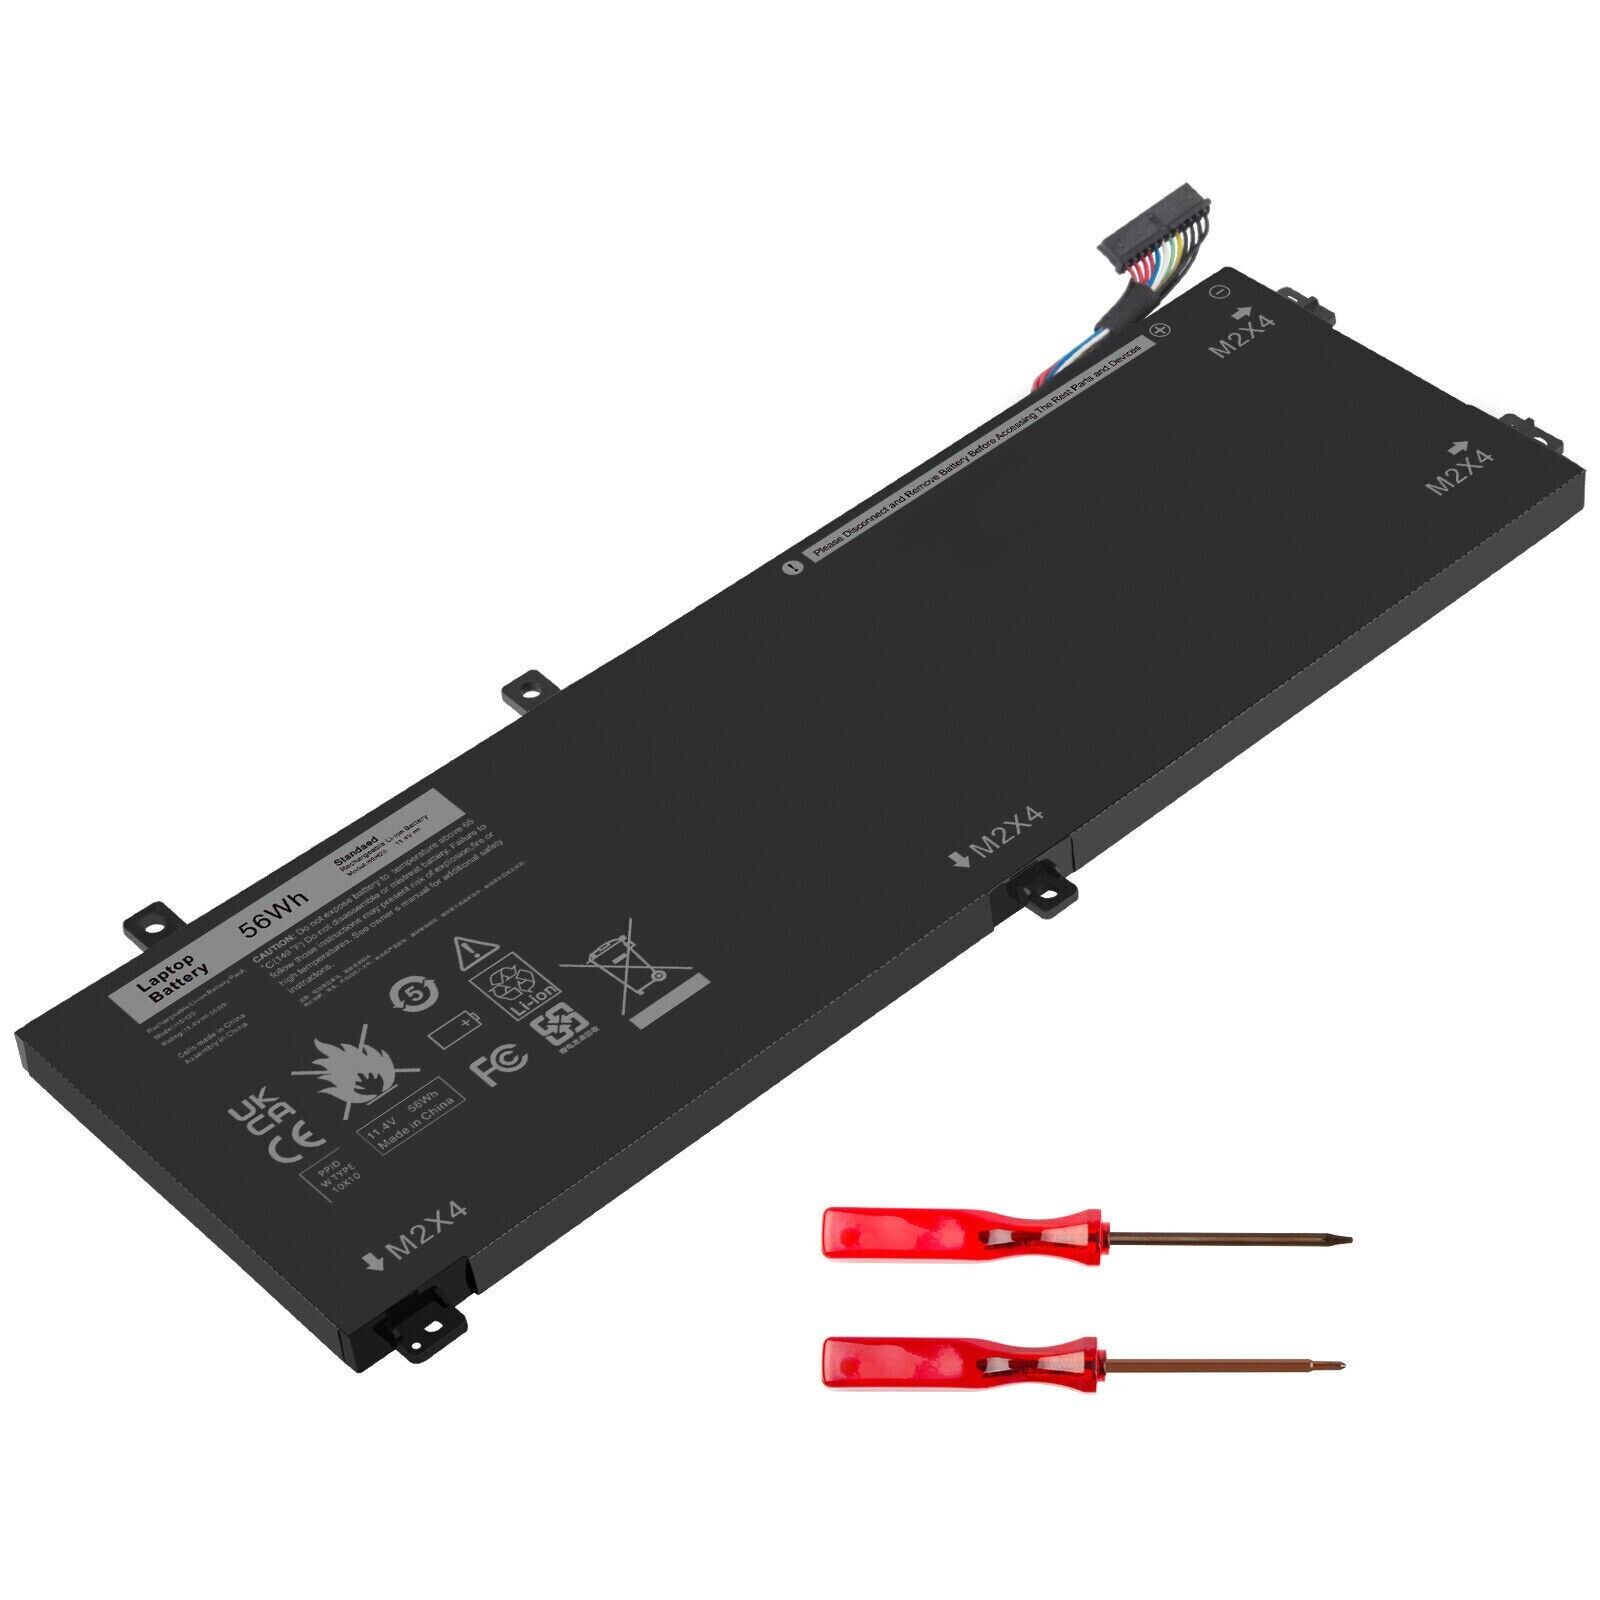 New OEM H5H20 Laptop Battery for Dell XPS 15 9550 9560 9570 Precision 5510 5520